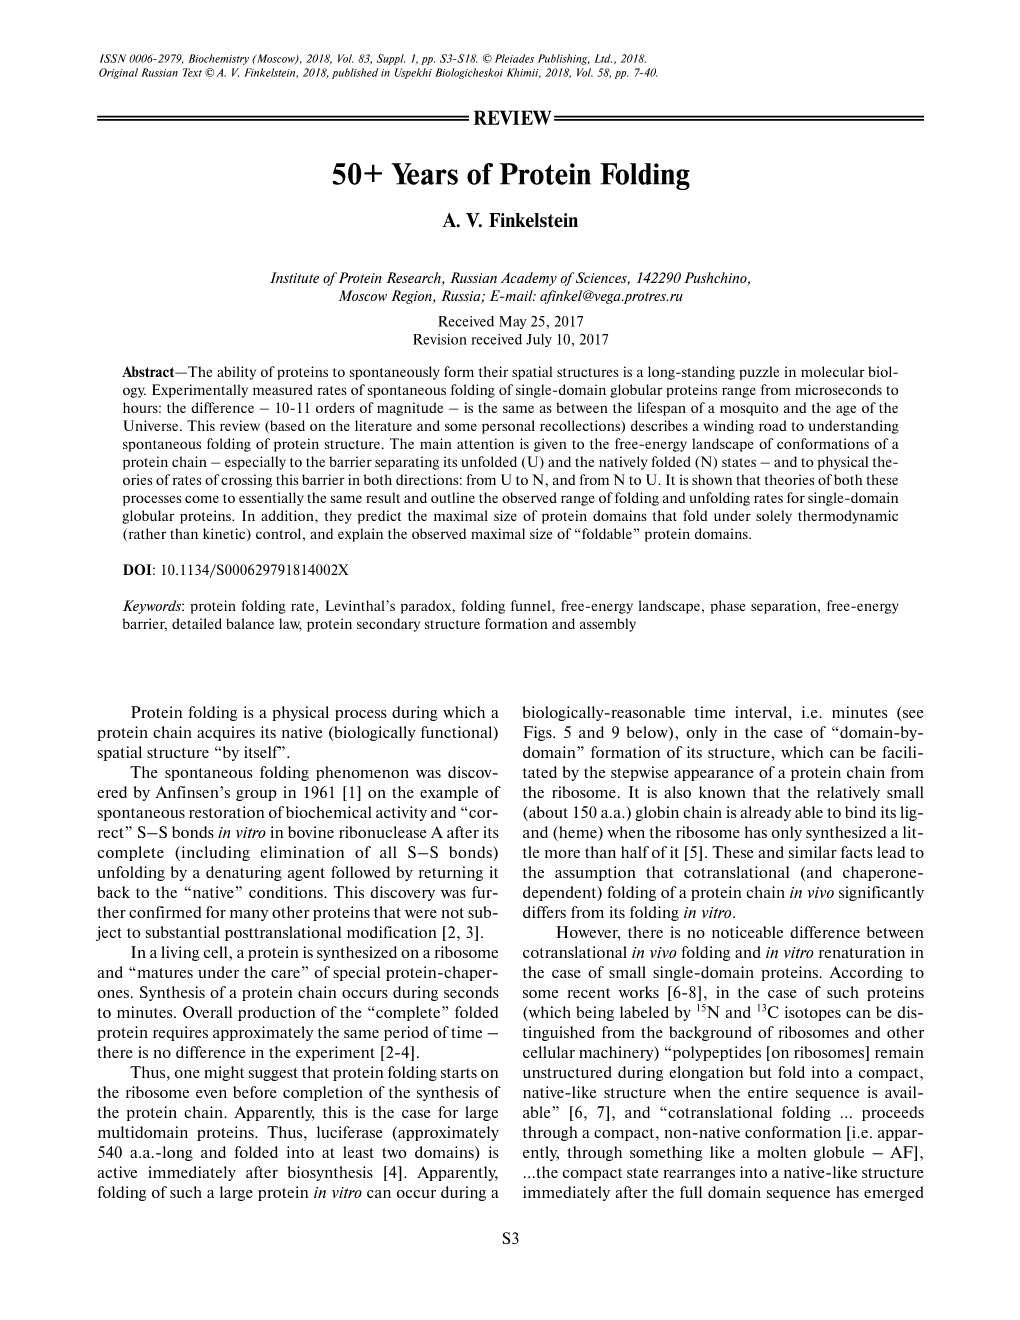 50+ Years of Protein Folding